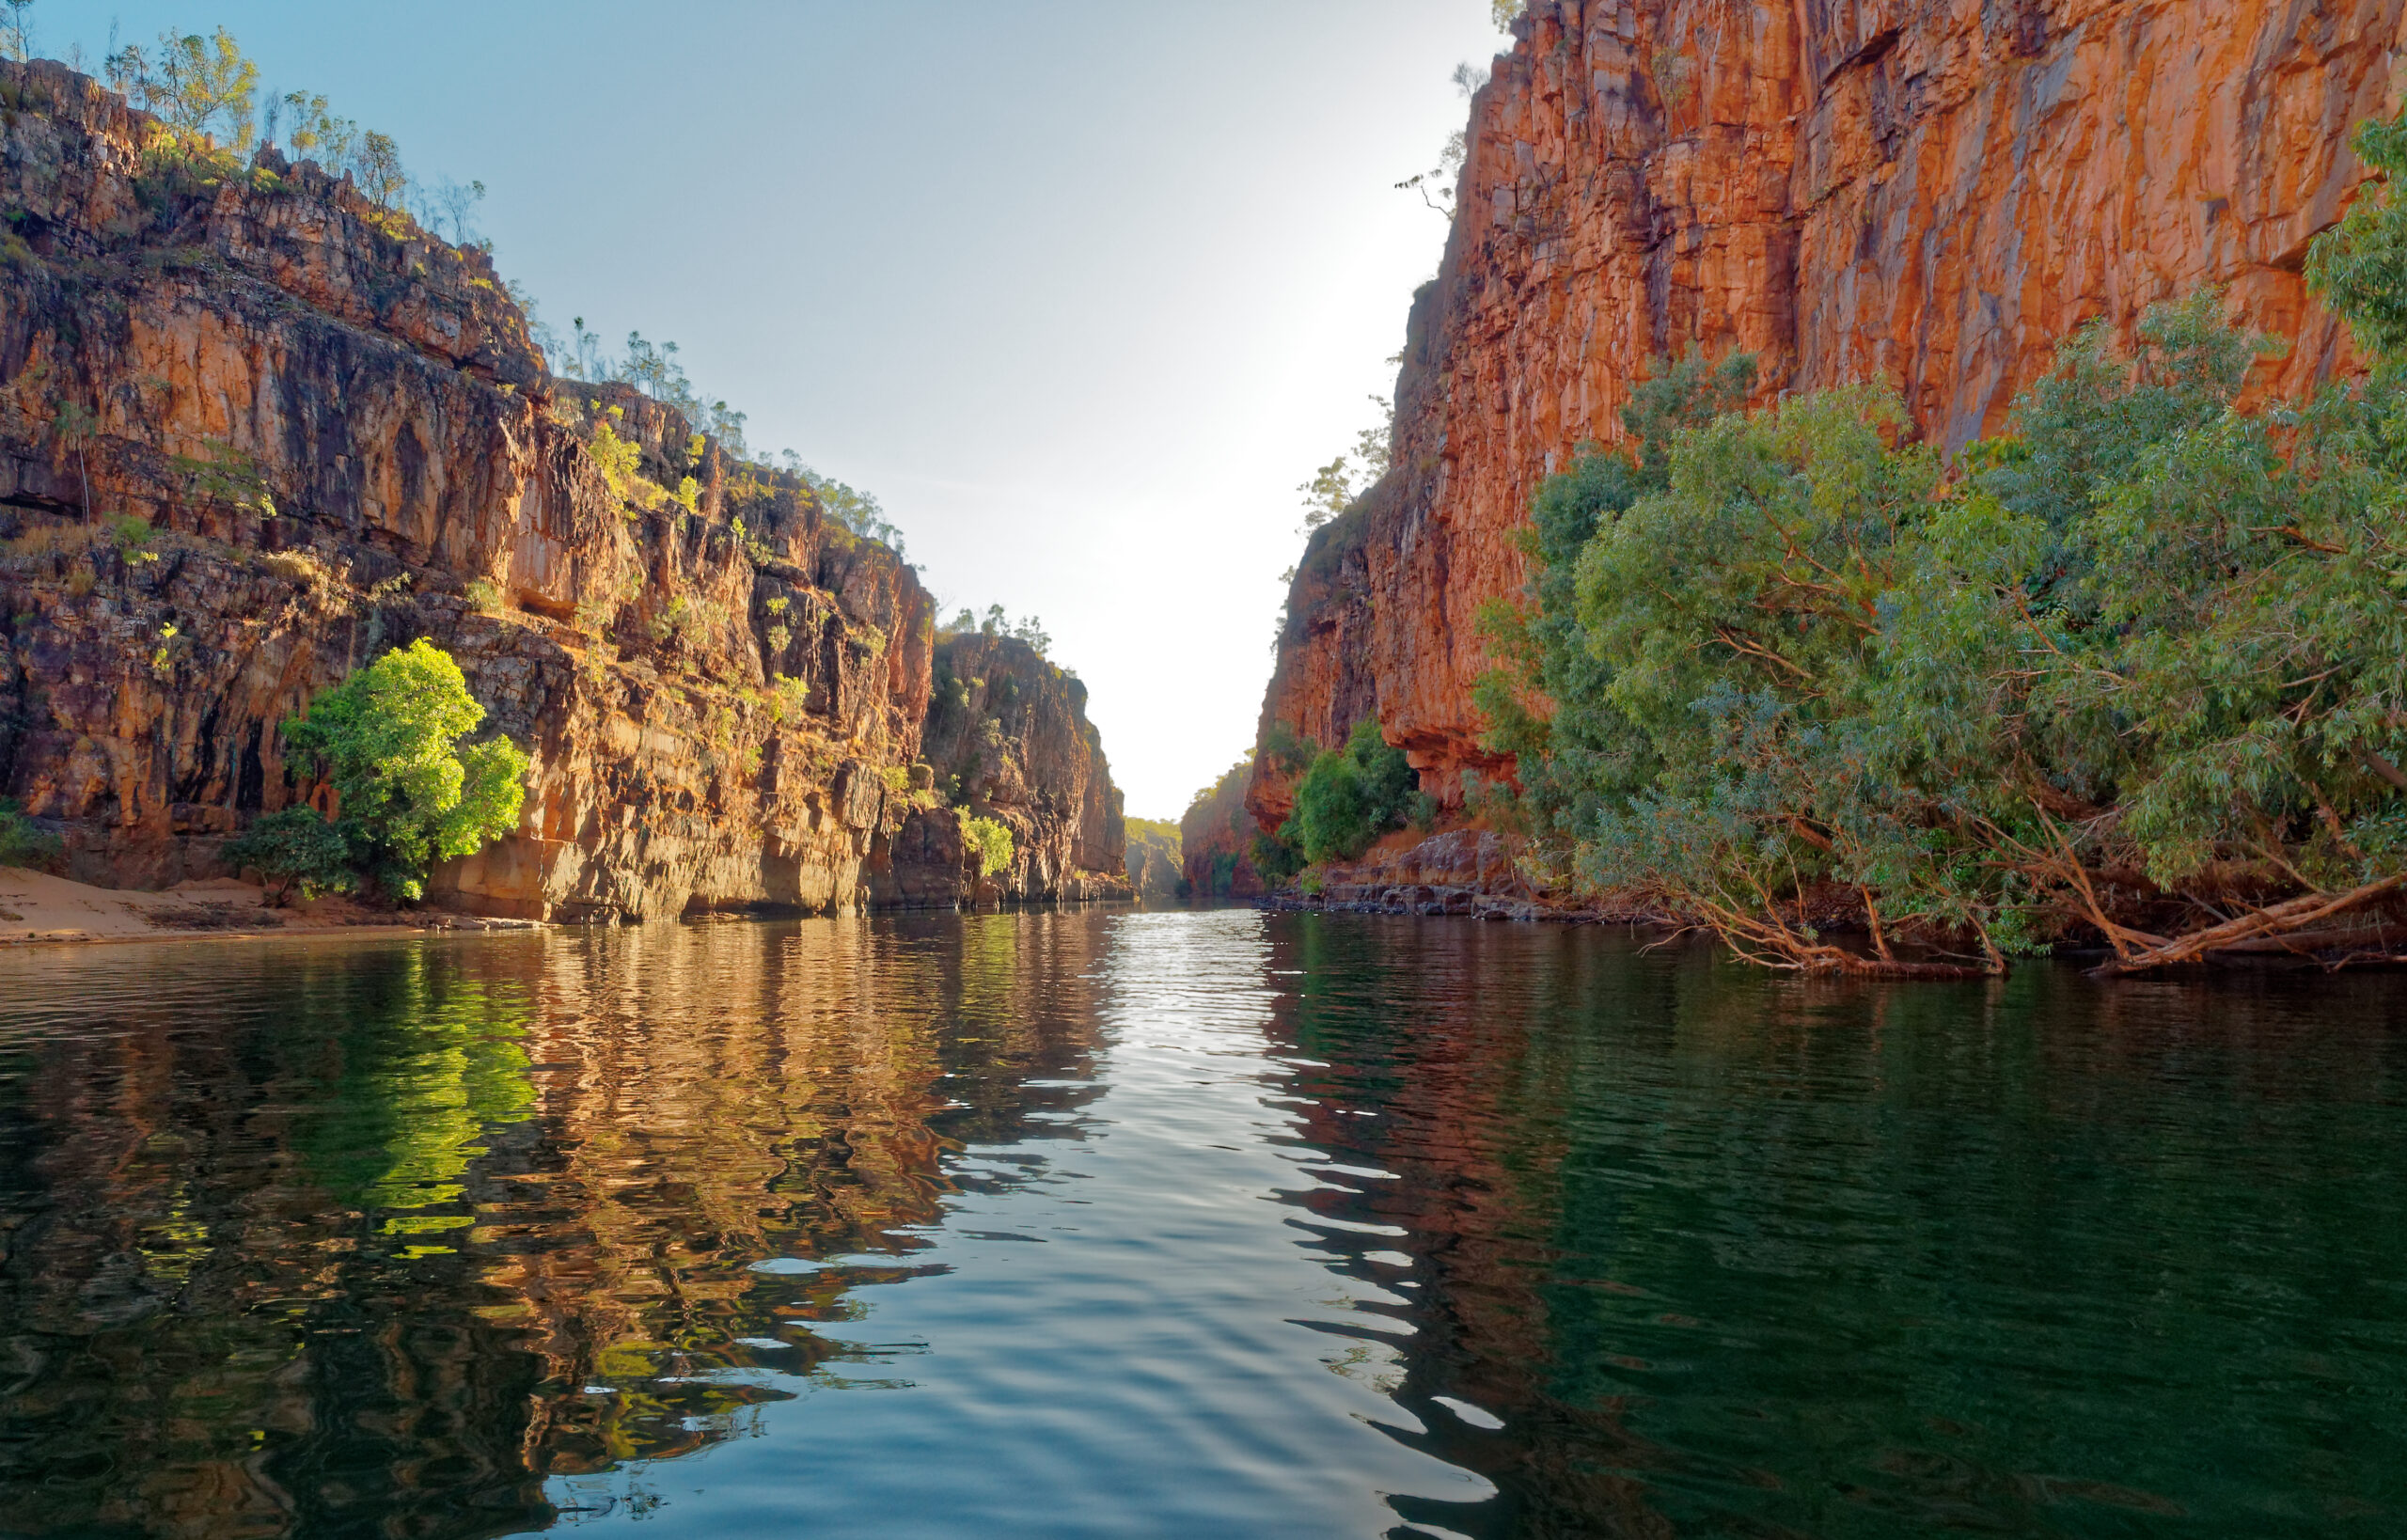 Katherine Gorge located a 25-minute drive from Katherine, Northern Territory. (Photo Credit: Ian Crocker / Shutterstock)